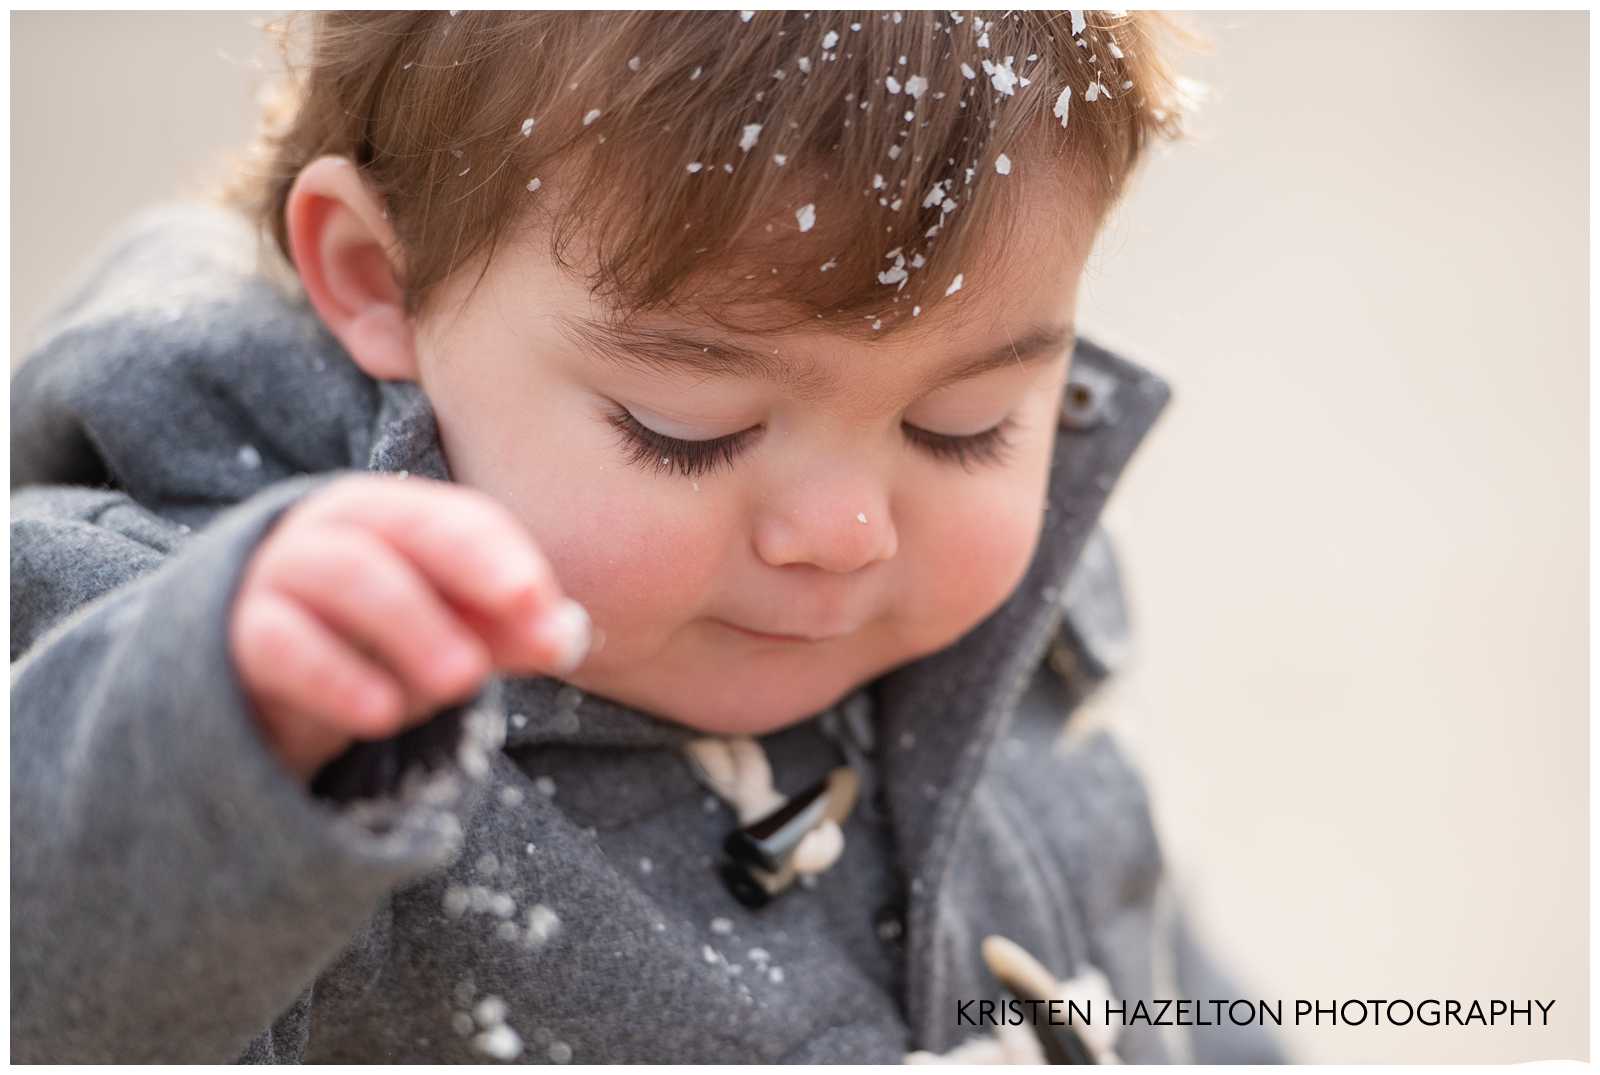 Toddler boy playing in the snow with snowflakes in his eyelashes, hair, and on his nose